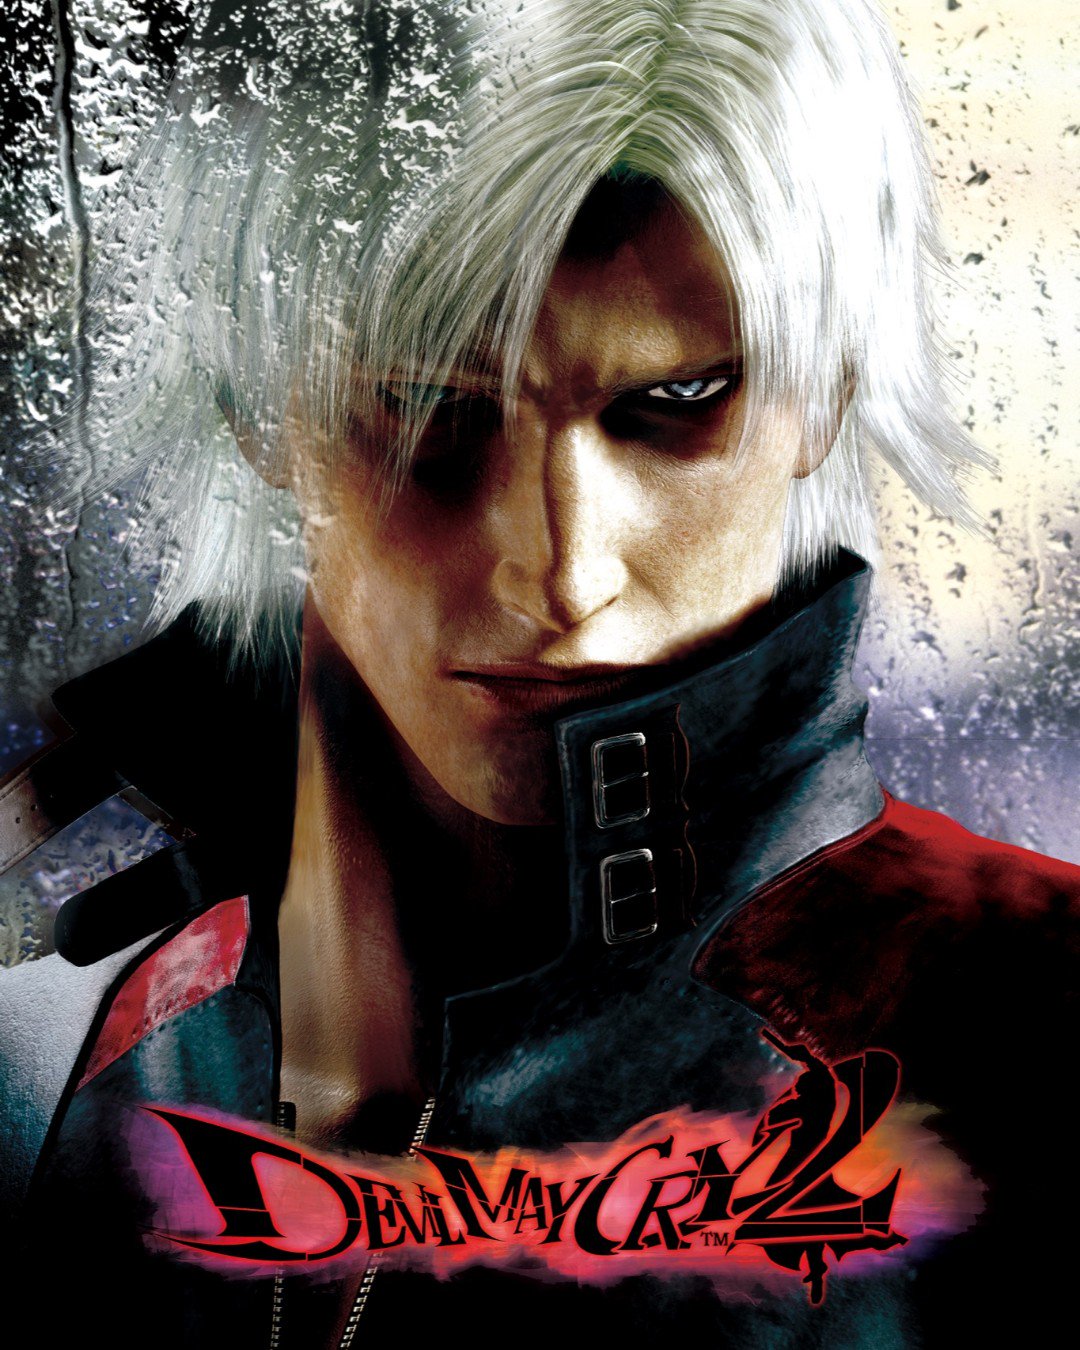 Devil May Cry 1 announced for Switch